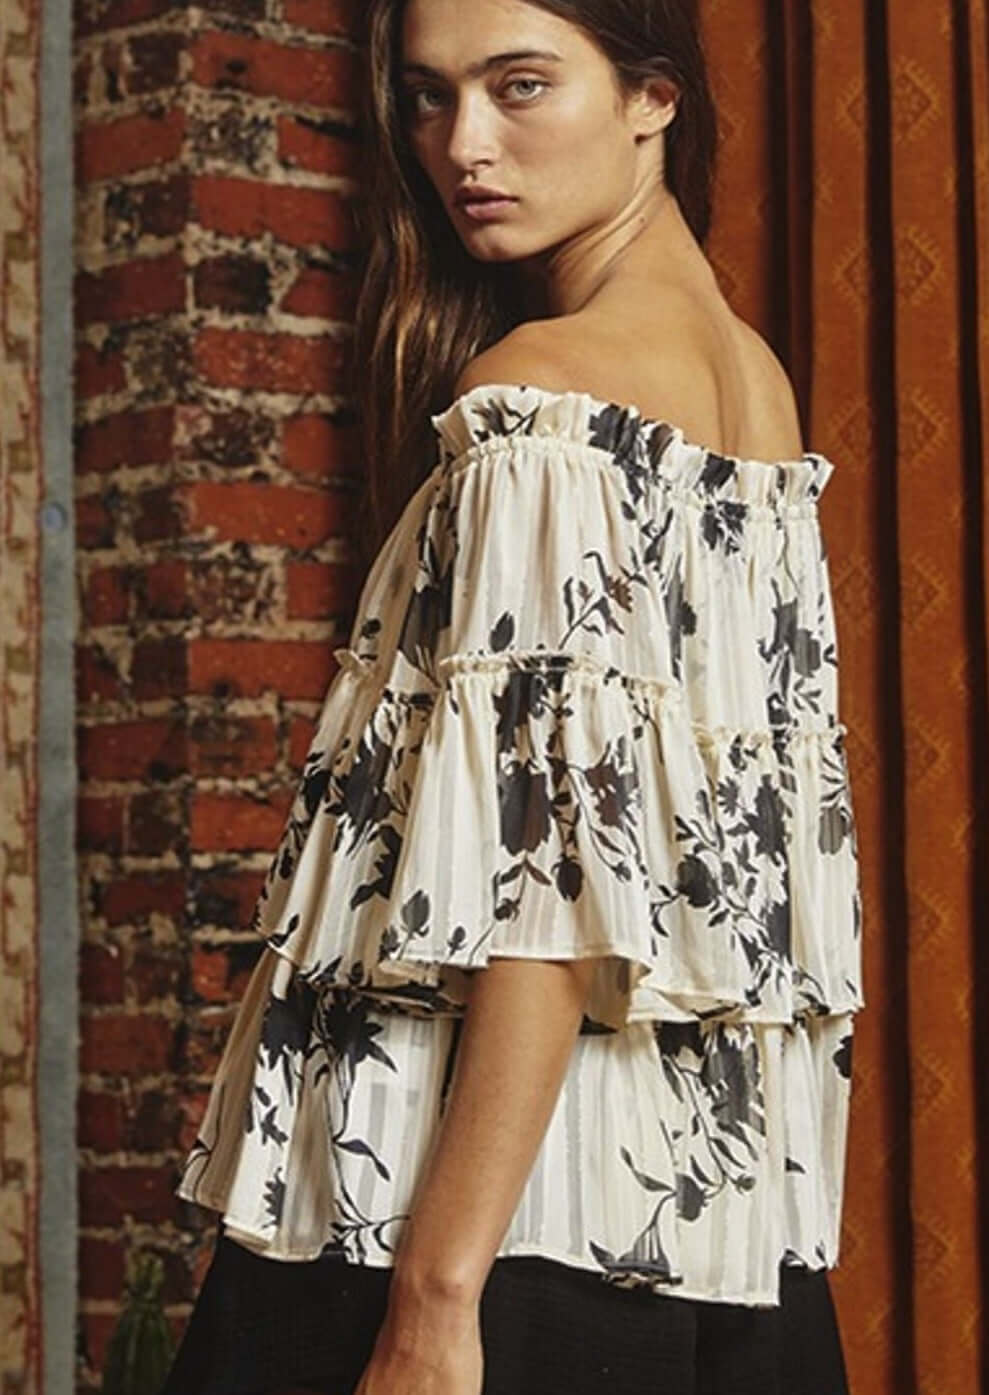 Bucket List Style# T1484 | Ladies Floral Print Tiered Off Shoulder Top with Merrow stitch detailing lurex chiffon in Cream with Black Floral Print | Made in USA